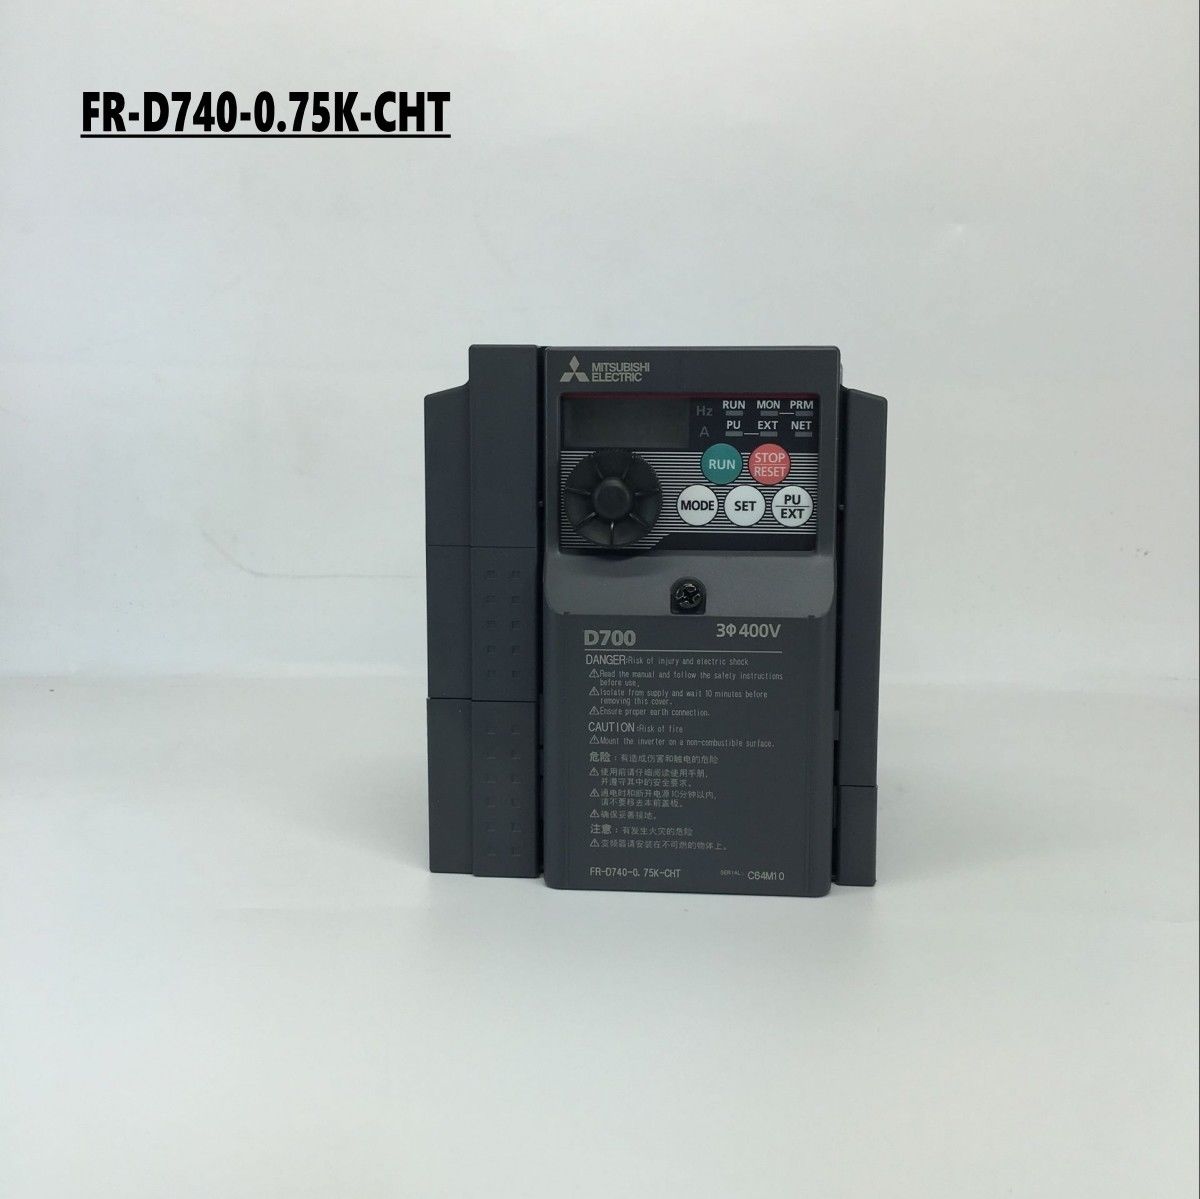 Brand New MITSUBISHI inverter FR-D740-0.75K-CHT In Box FRD7400.75KCHT - Click Image to Close